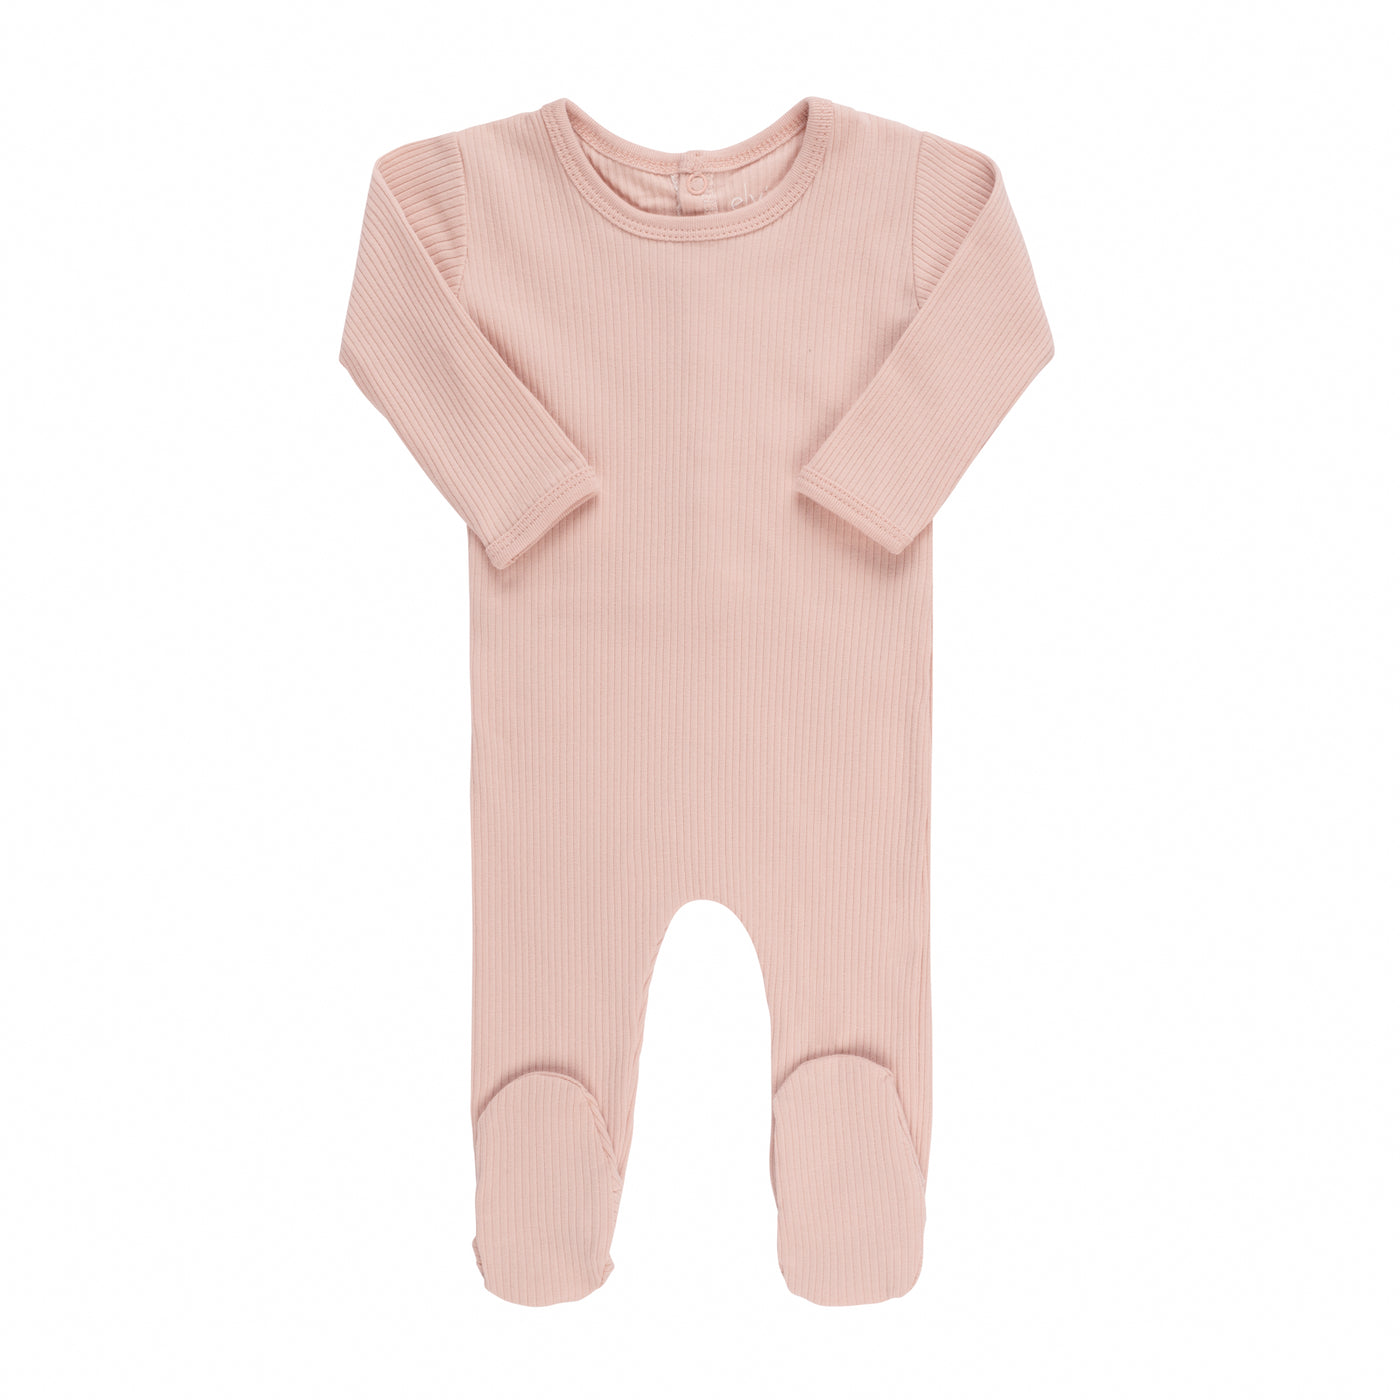 Ely's & Co. Ribbed Solid Collection Blush Footie with Beanie